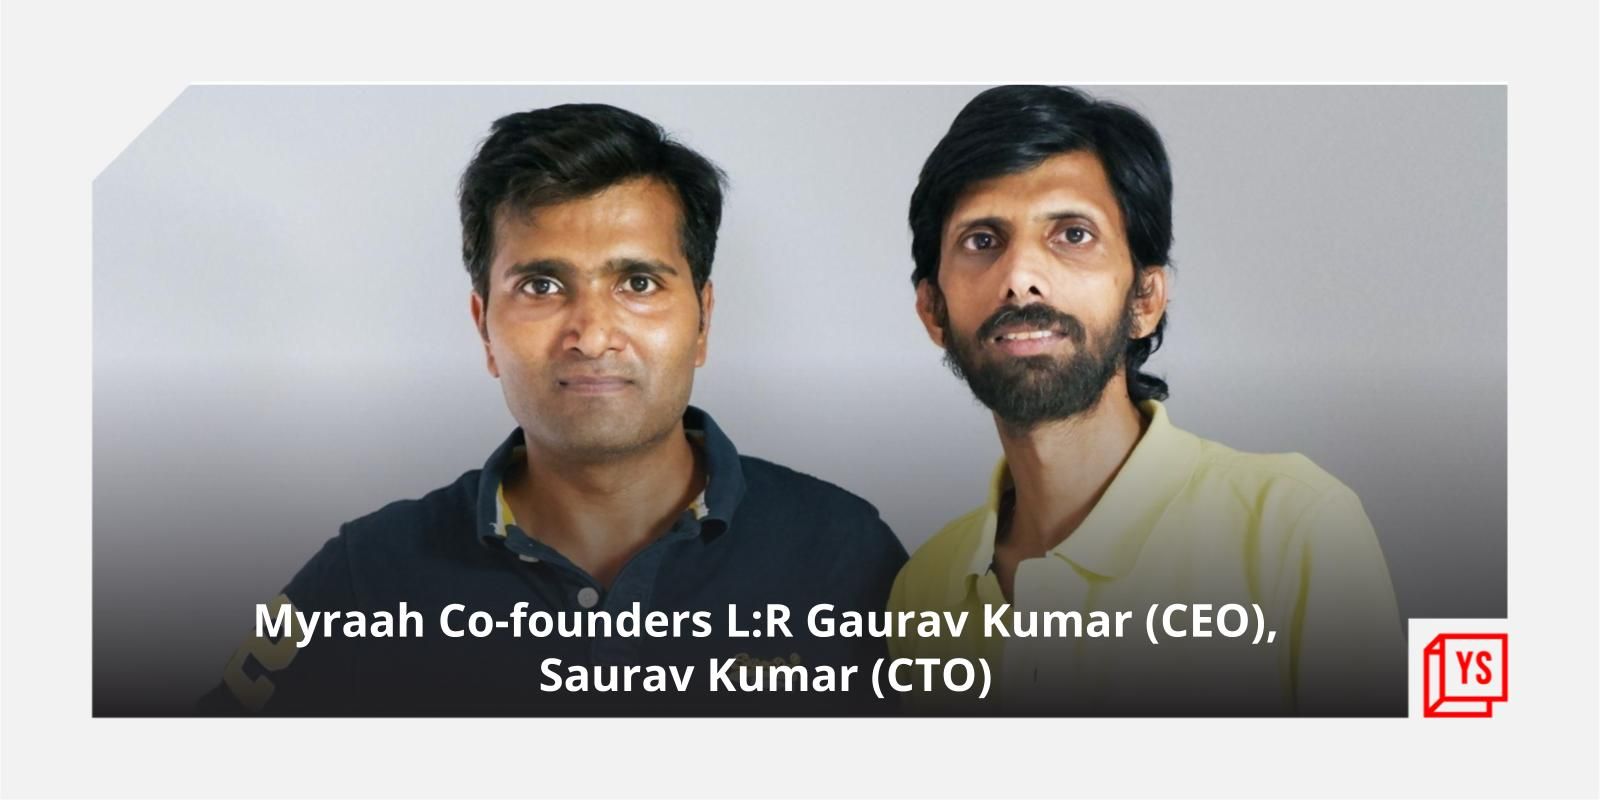 This brother duo’s no-code startup enables users transition from Web2 to Web3 applications